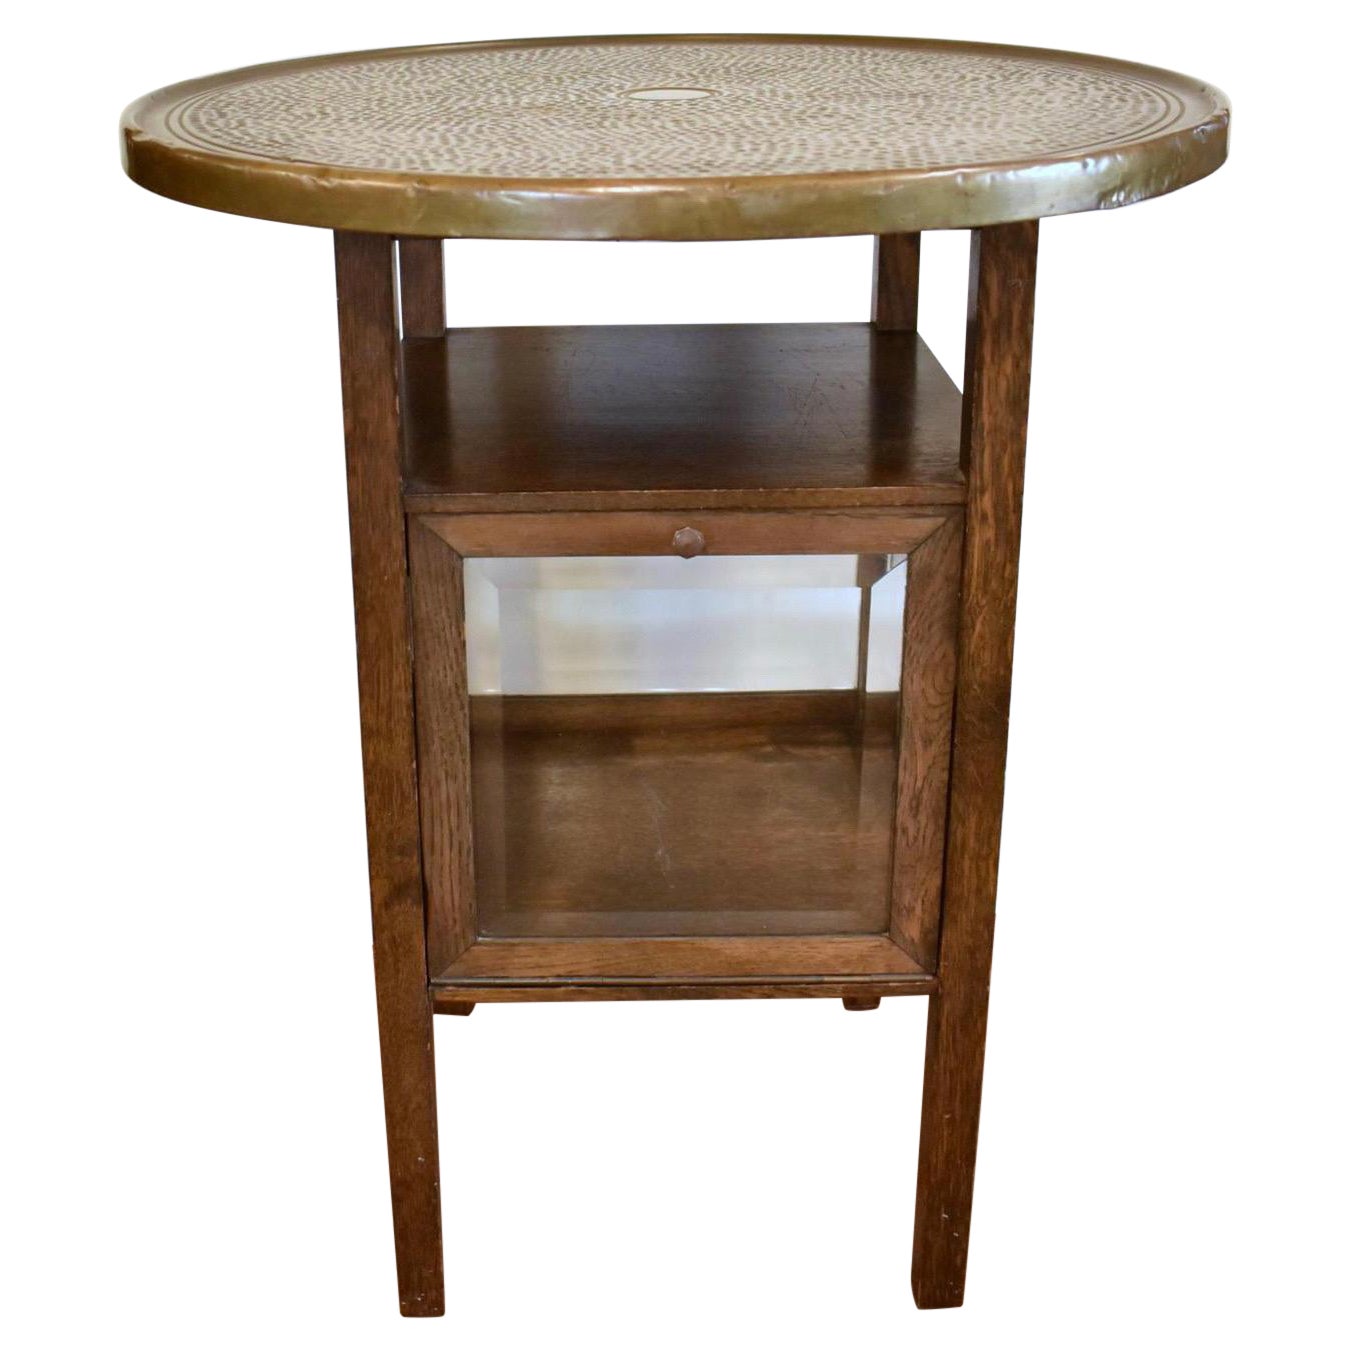 Antique Arts & Crafts Brass Top Table with Display Cabinet Compartment For Sale